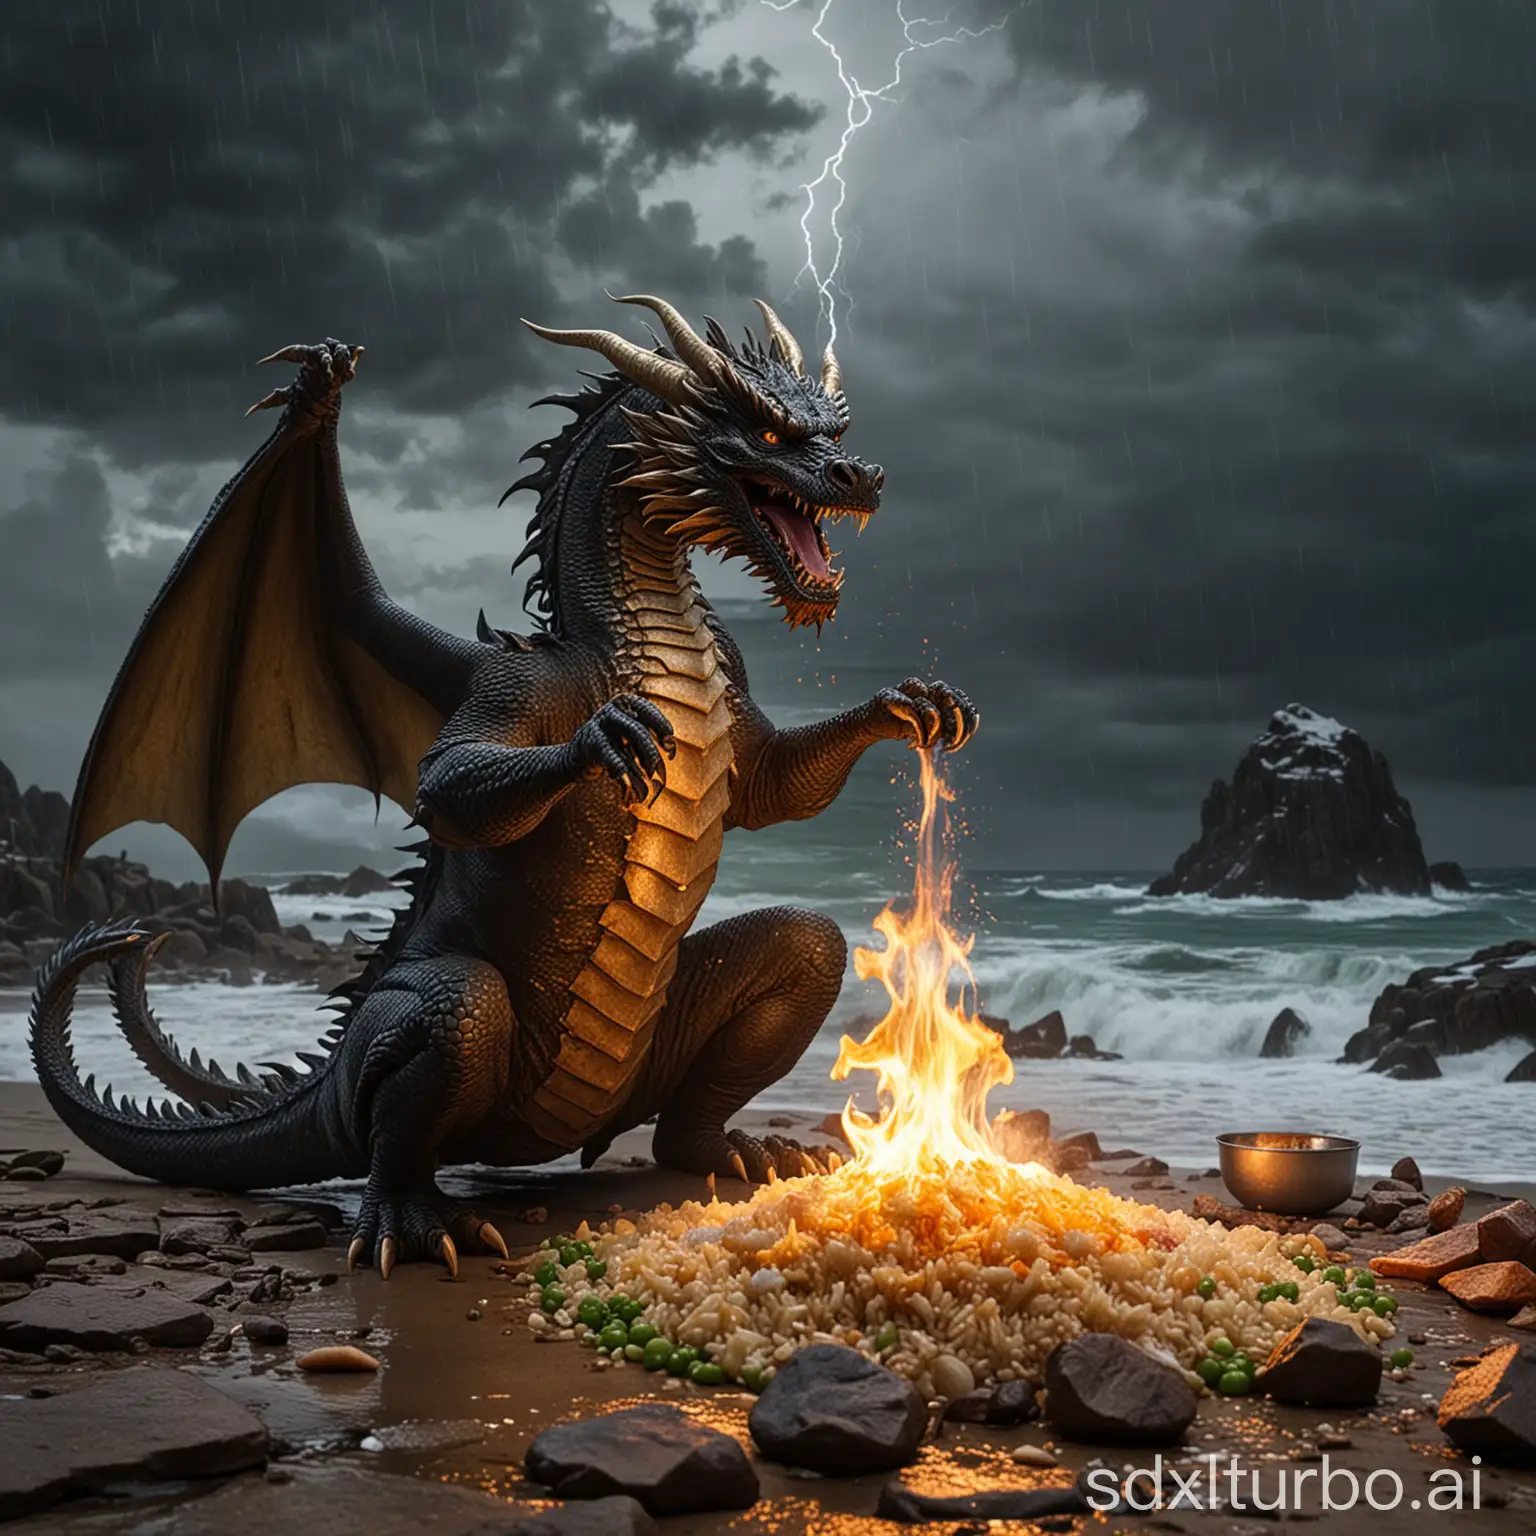 The dragon kneels down to cook fried rice in the storm